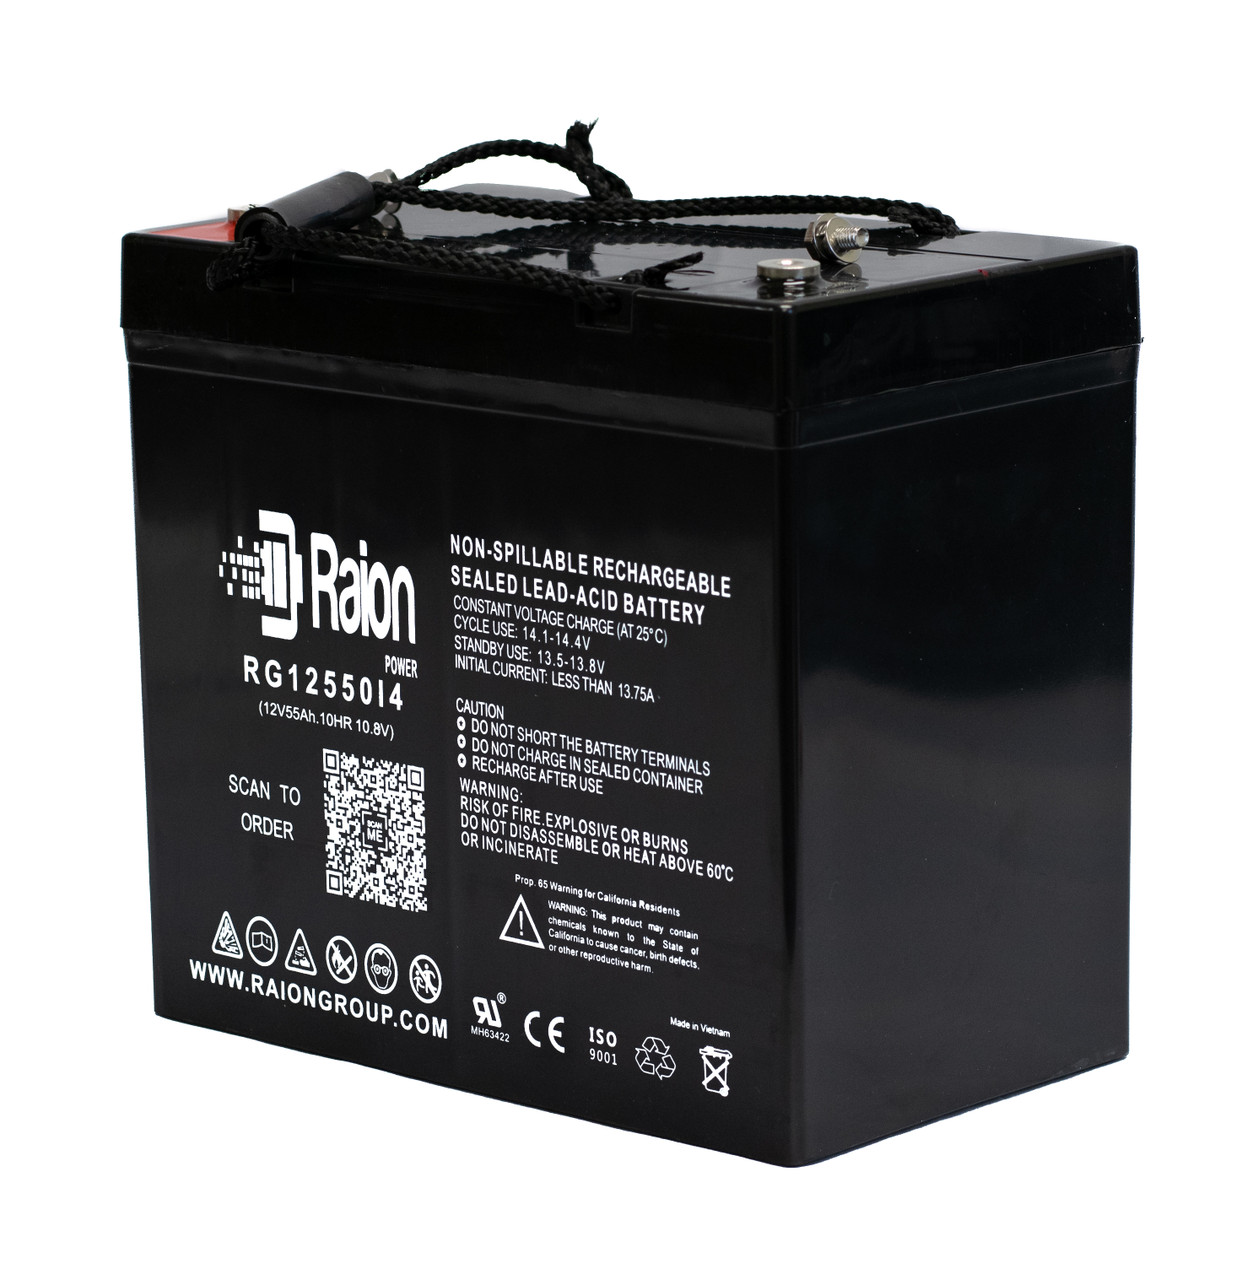 Raion Power Replacement 12V 55Ah Battery for Zeus PC55-12NB - 1 Pack